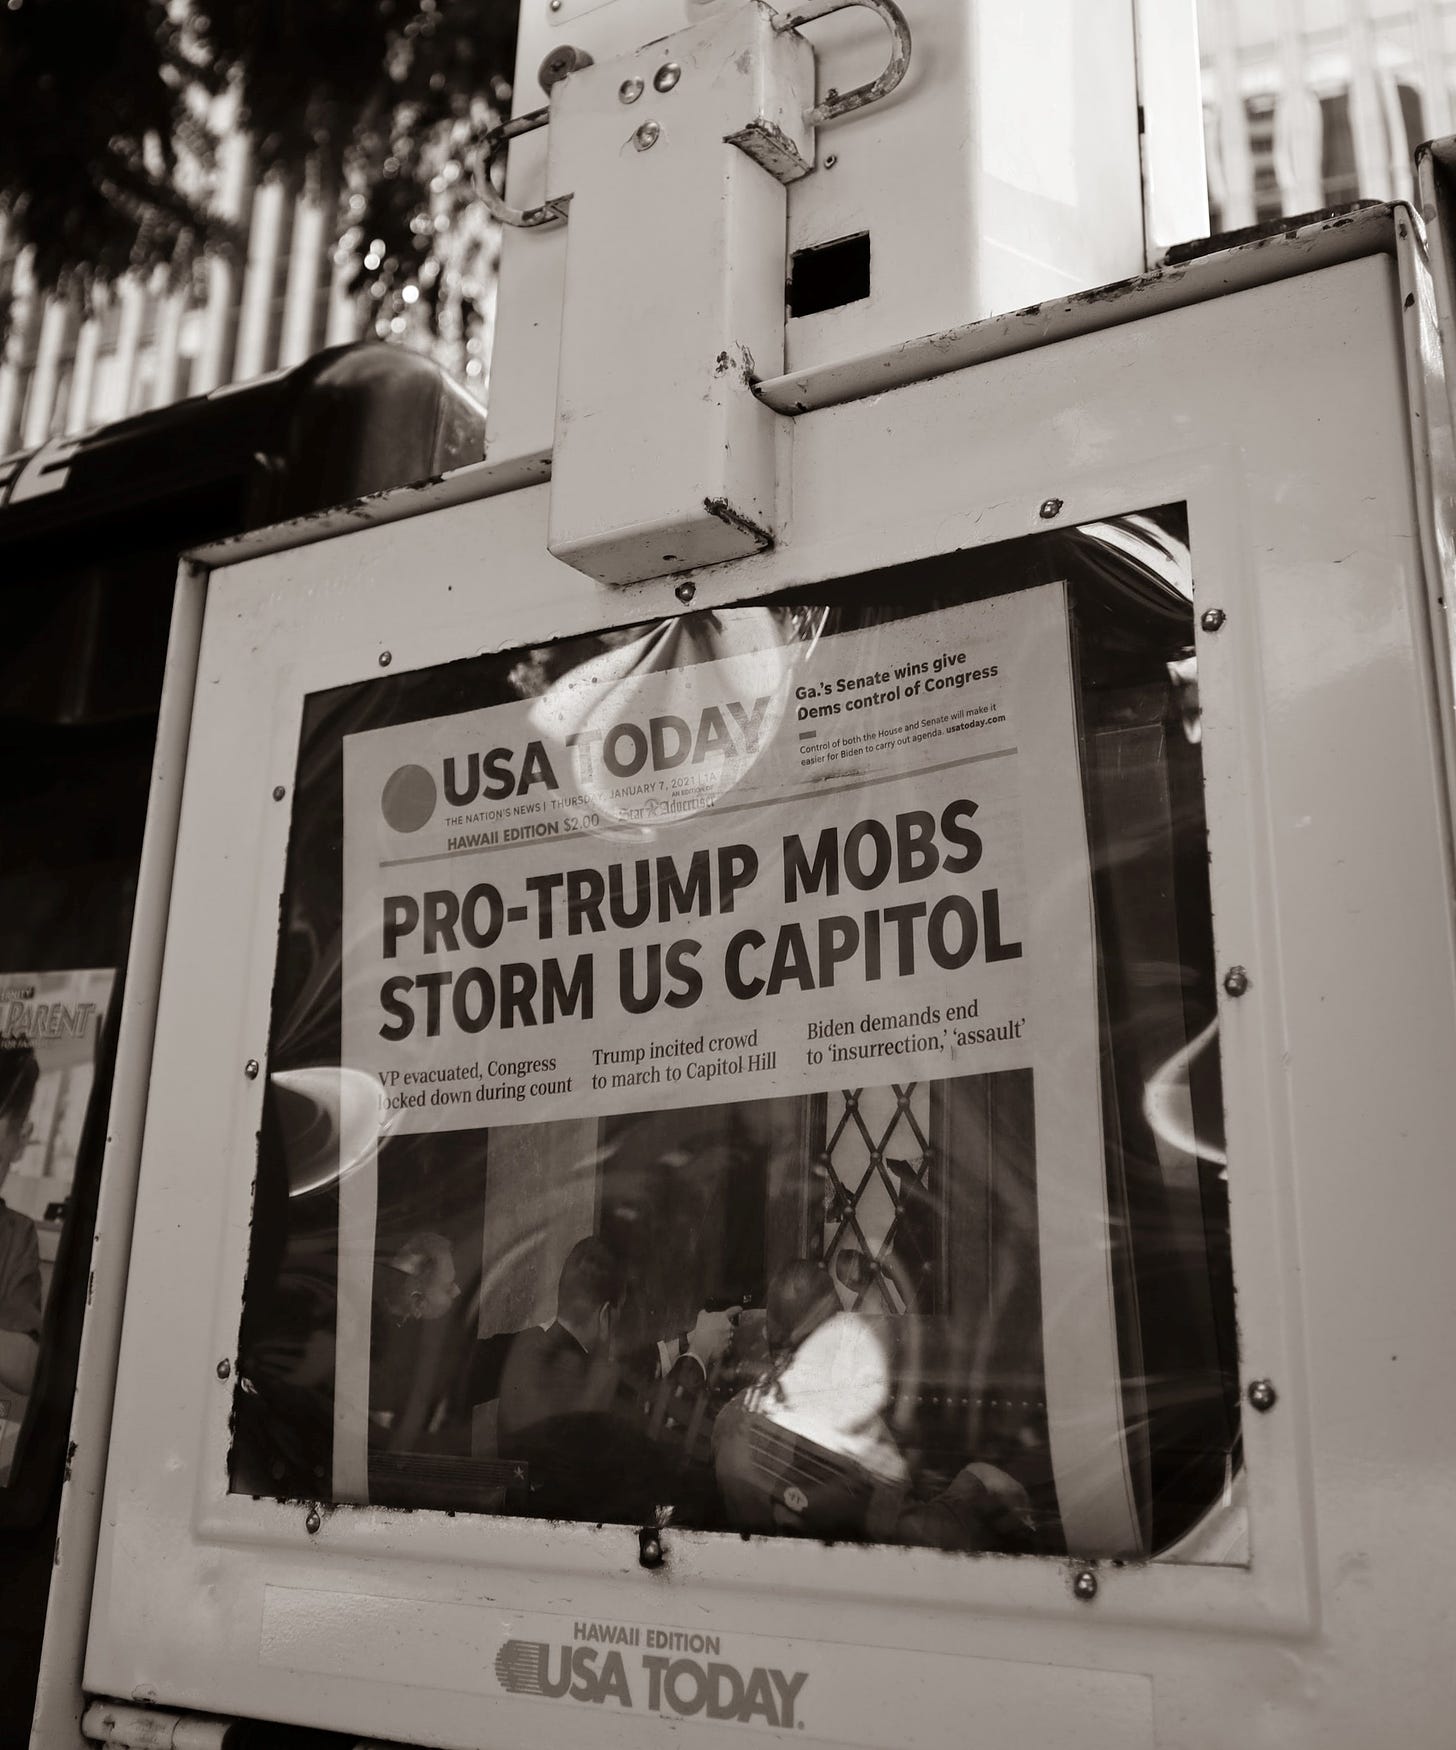 Photo of a newspaper bin with a headline that reads "Pro-Trump Mobs Storm US Capitol."